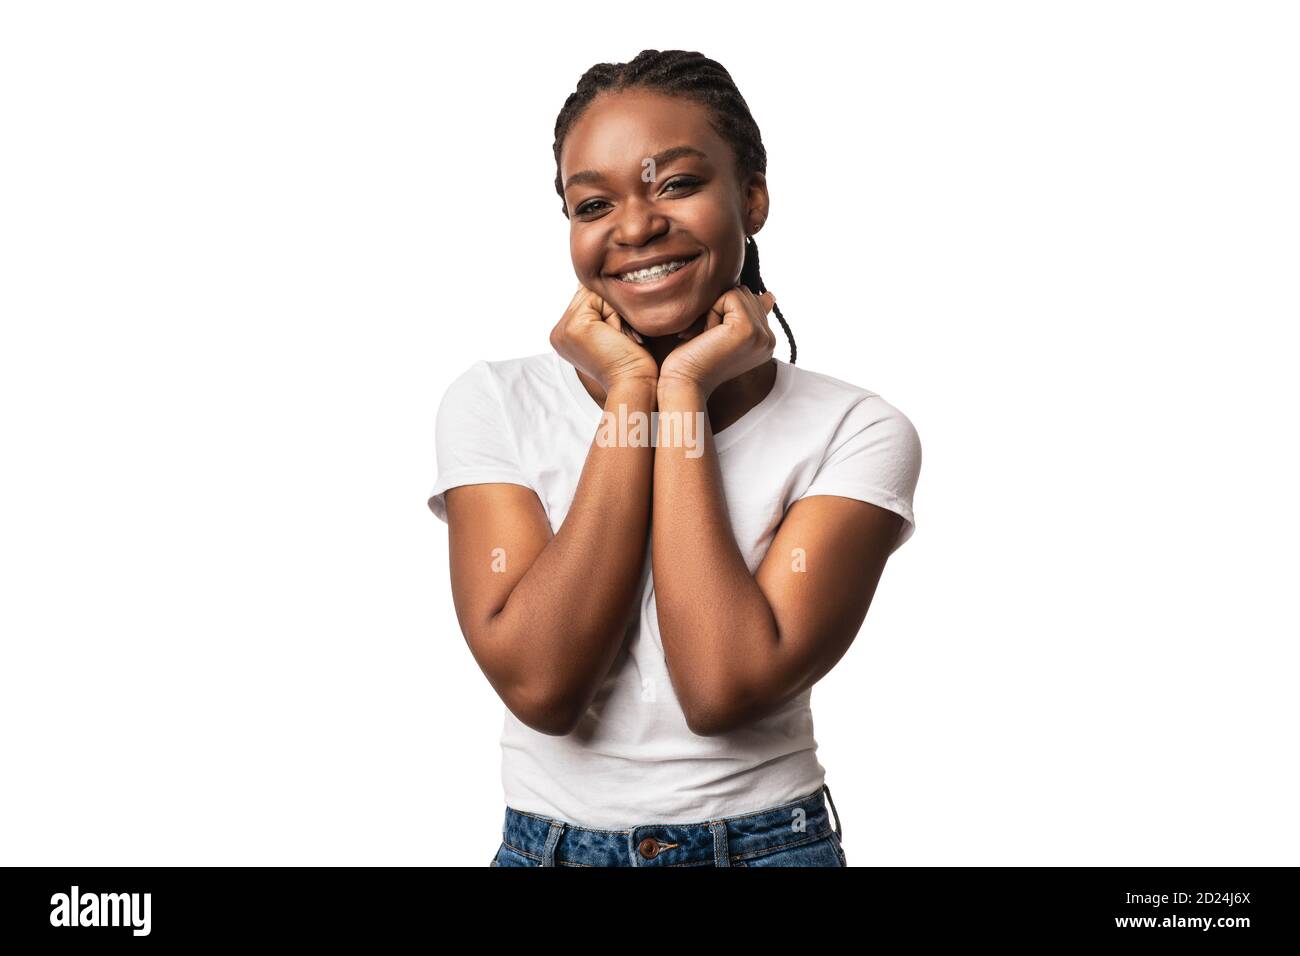 Smiling African American Woman With Brackets Posing Over White Background Stock Photo